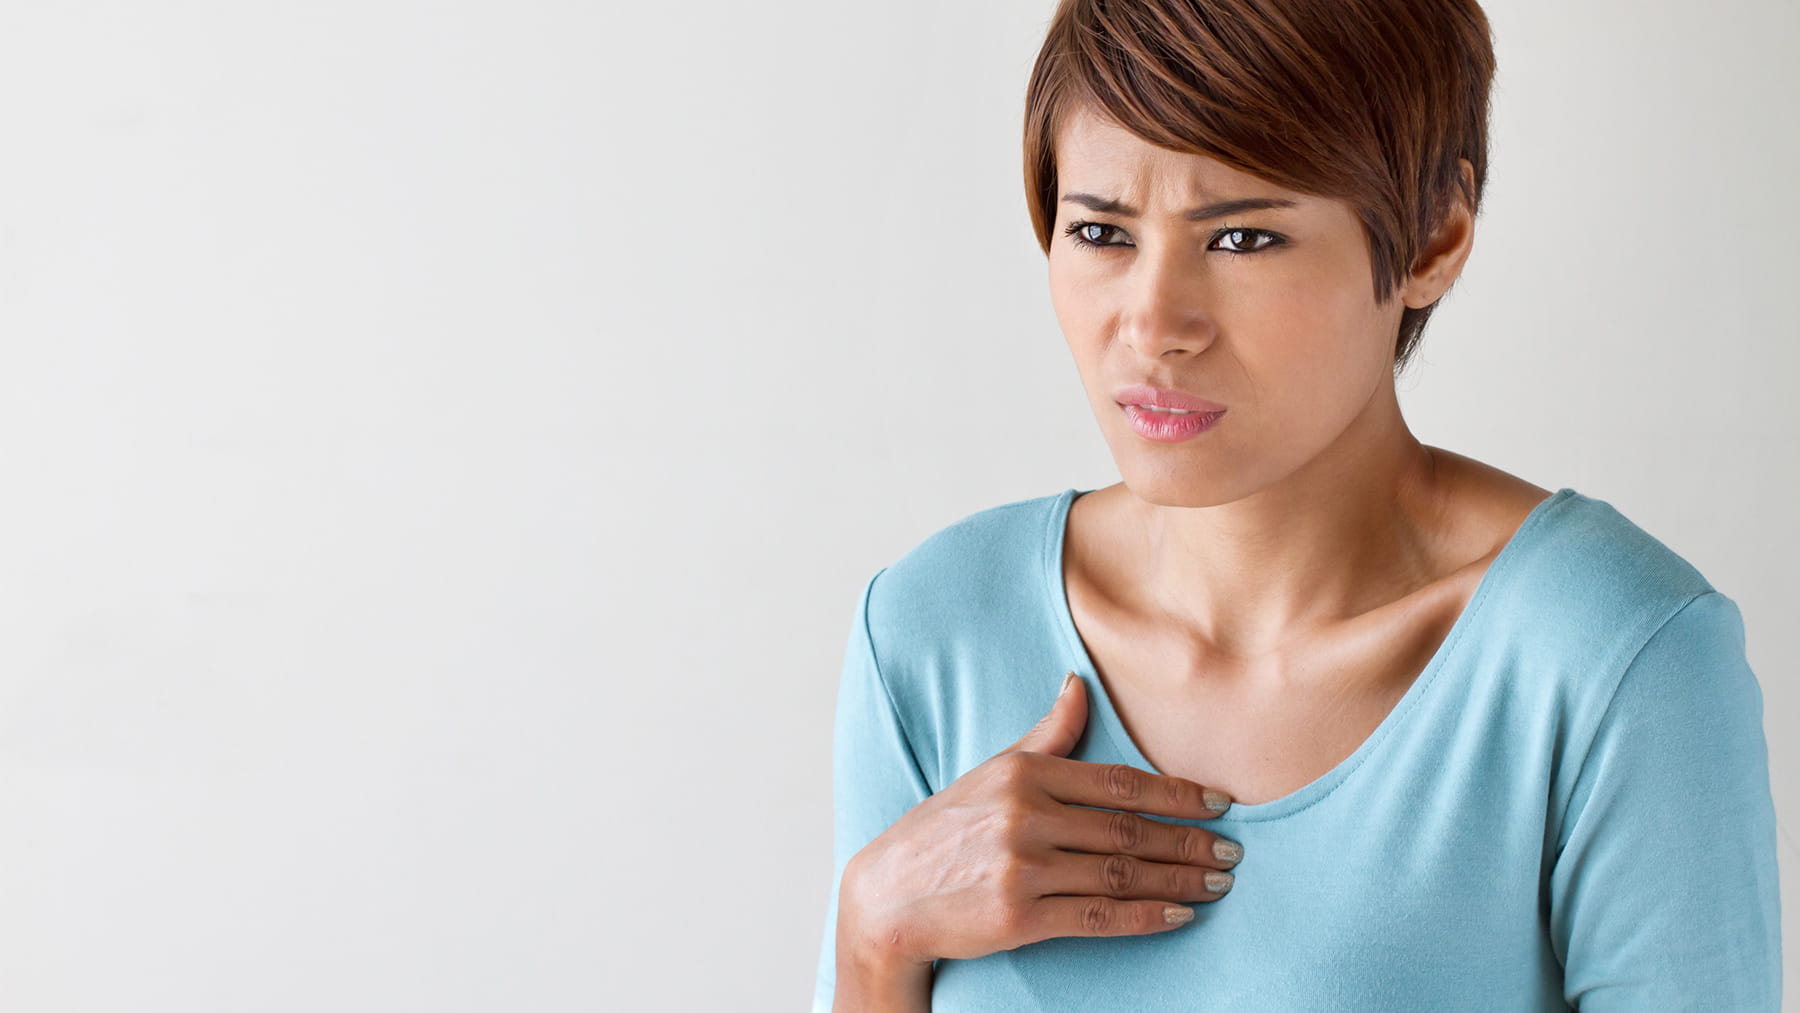 When should you get an irregular heartbeat checked?